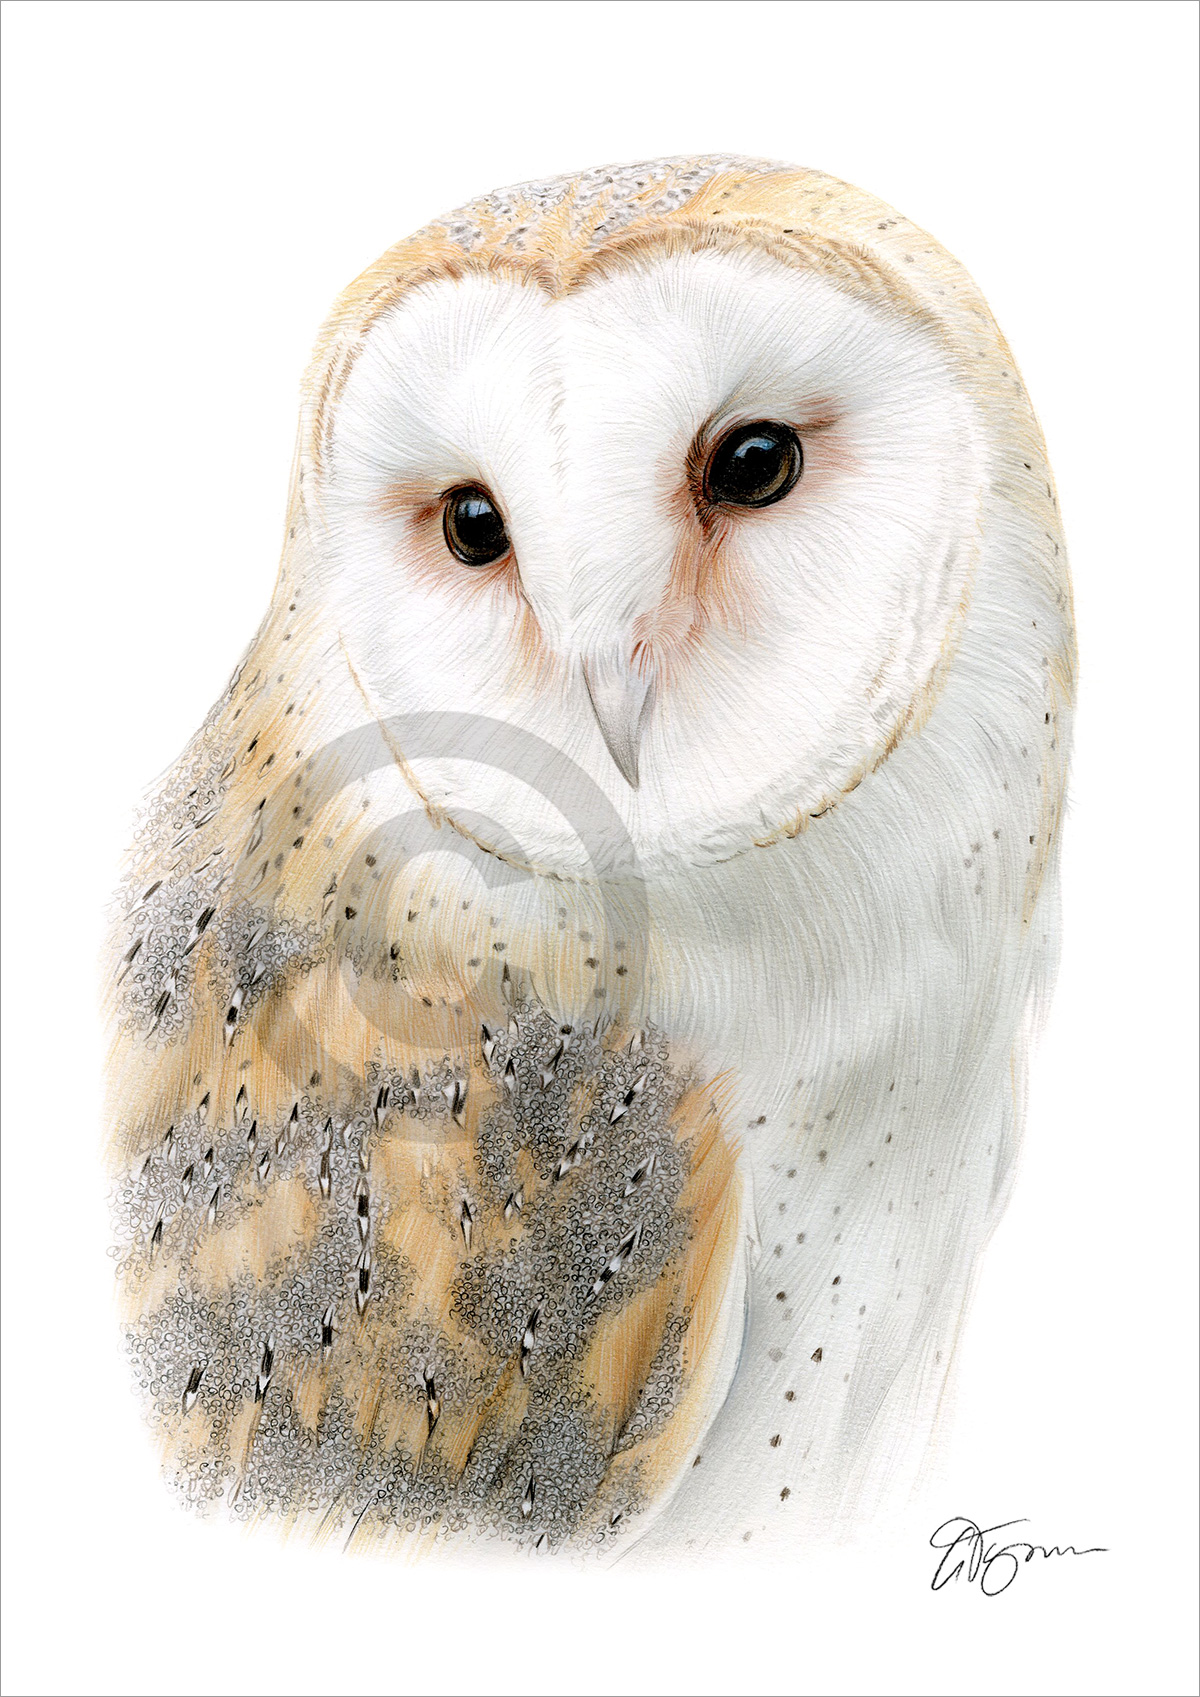 Colour pencil drawing of a barn owl in portrait by artist Gary Tymon